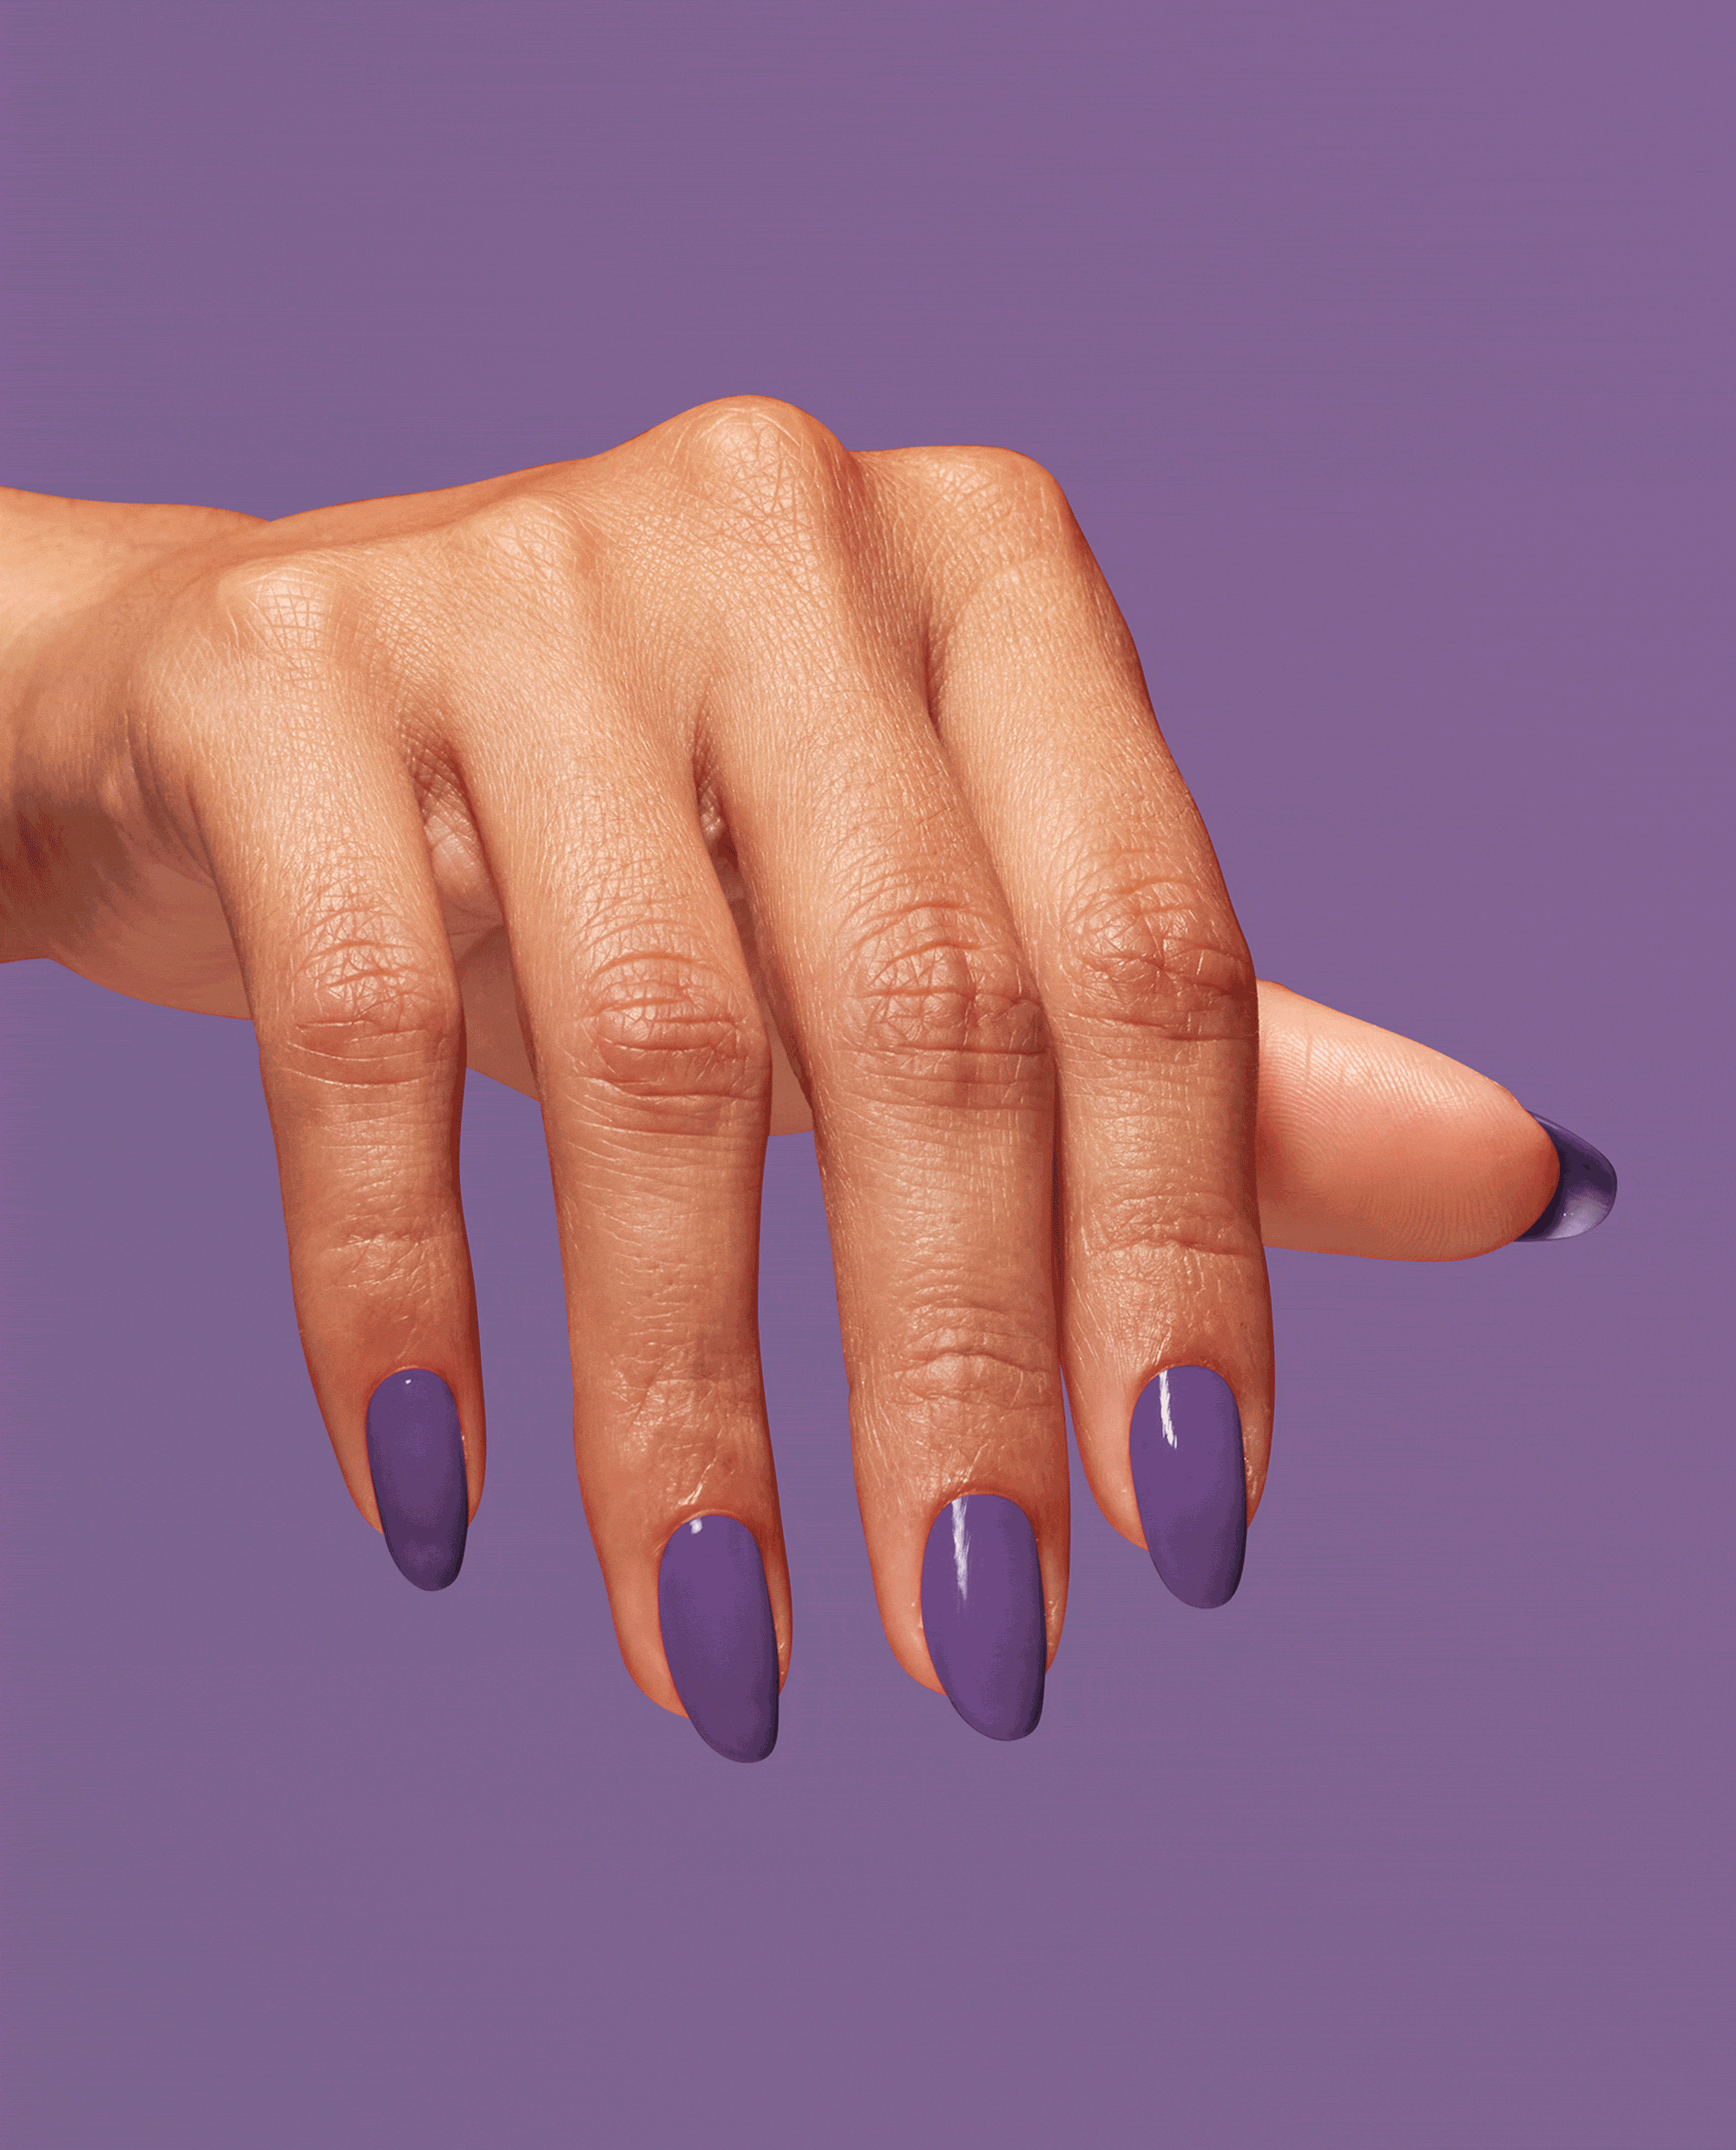 The Right Way to Remove Press-On Nails At Home, According to the Pros |  Allure